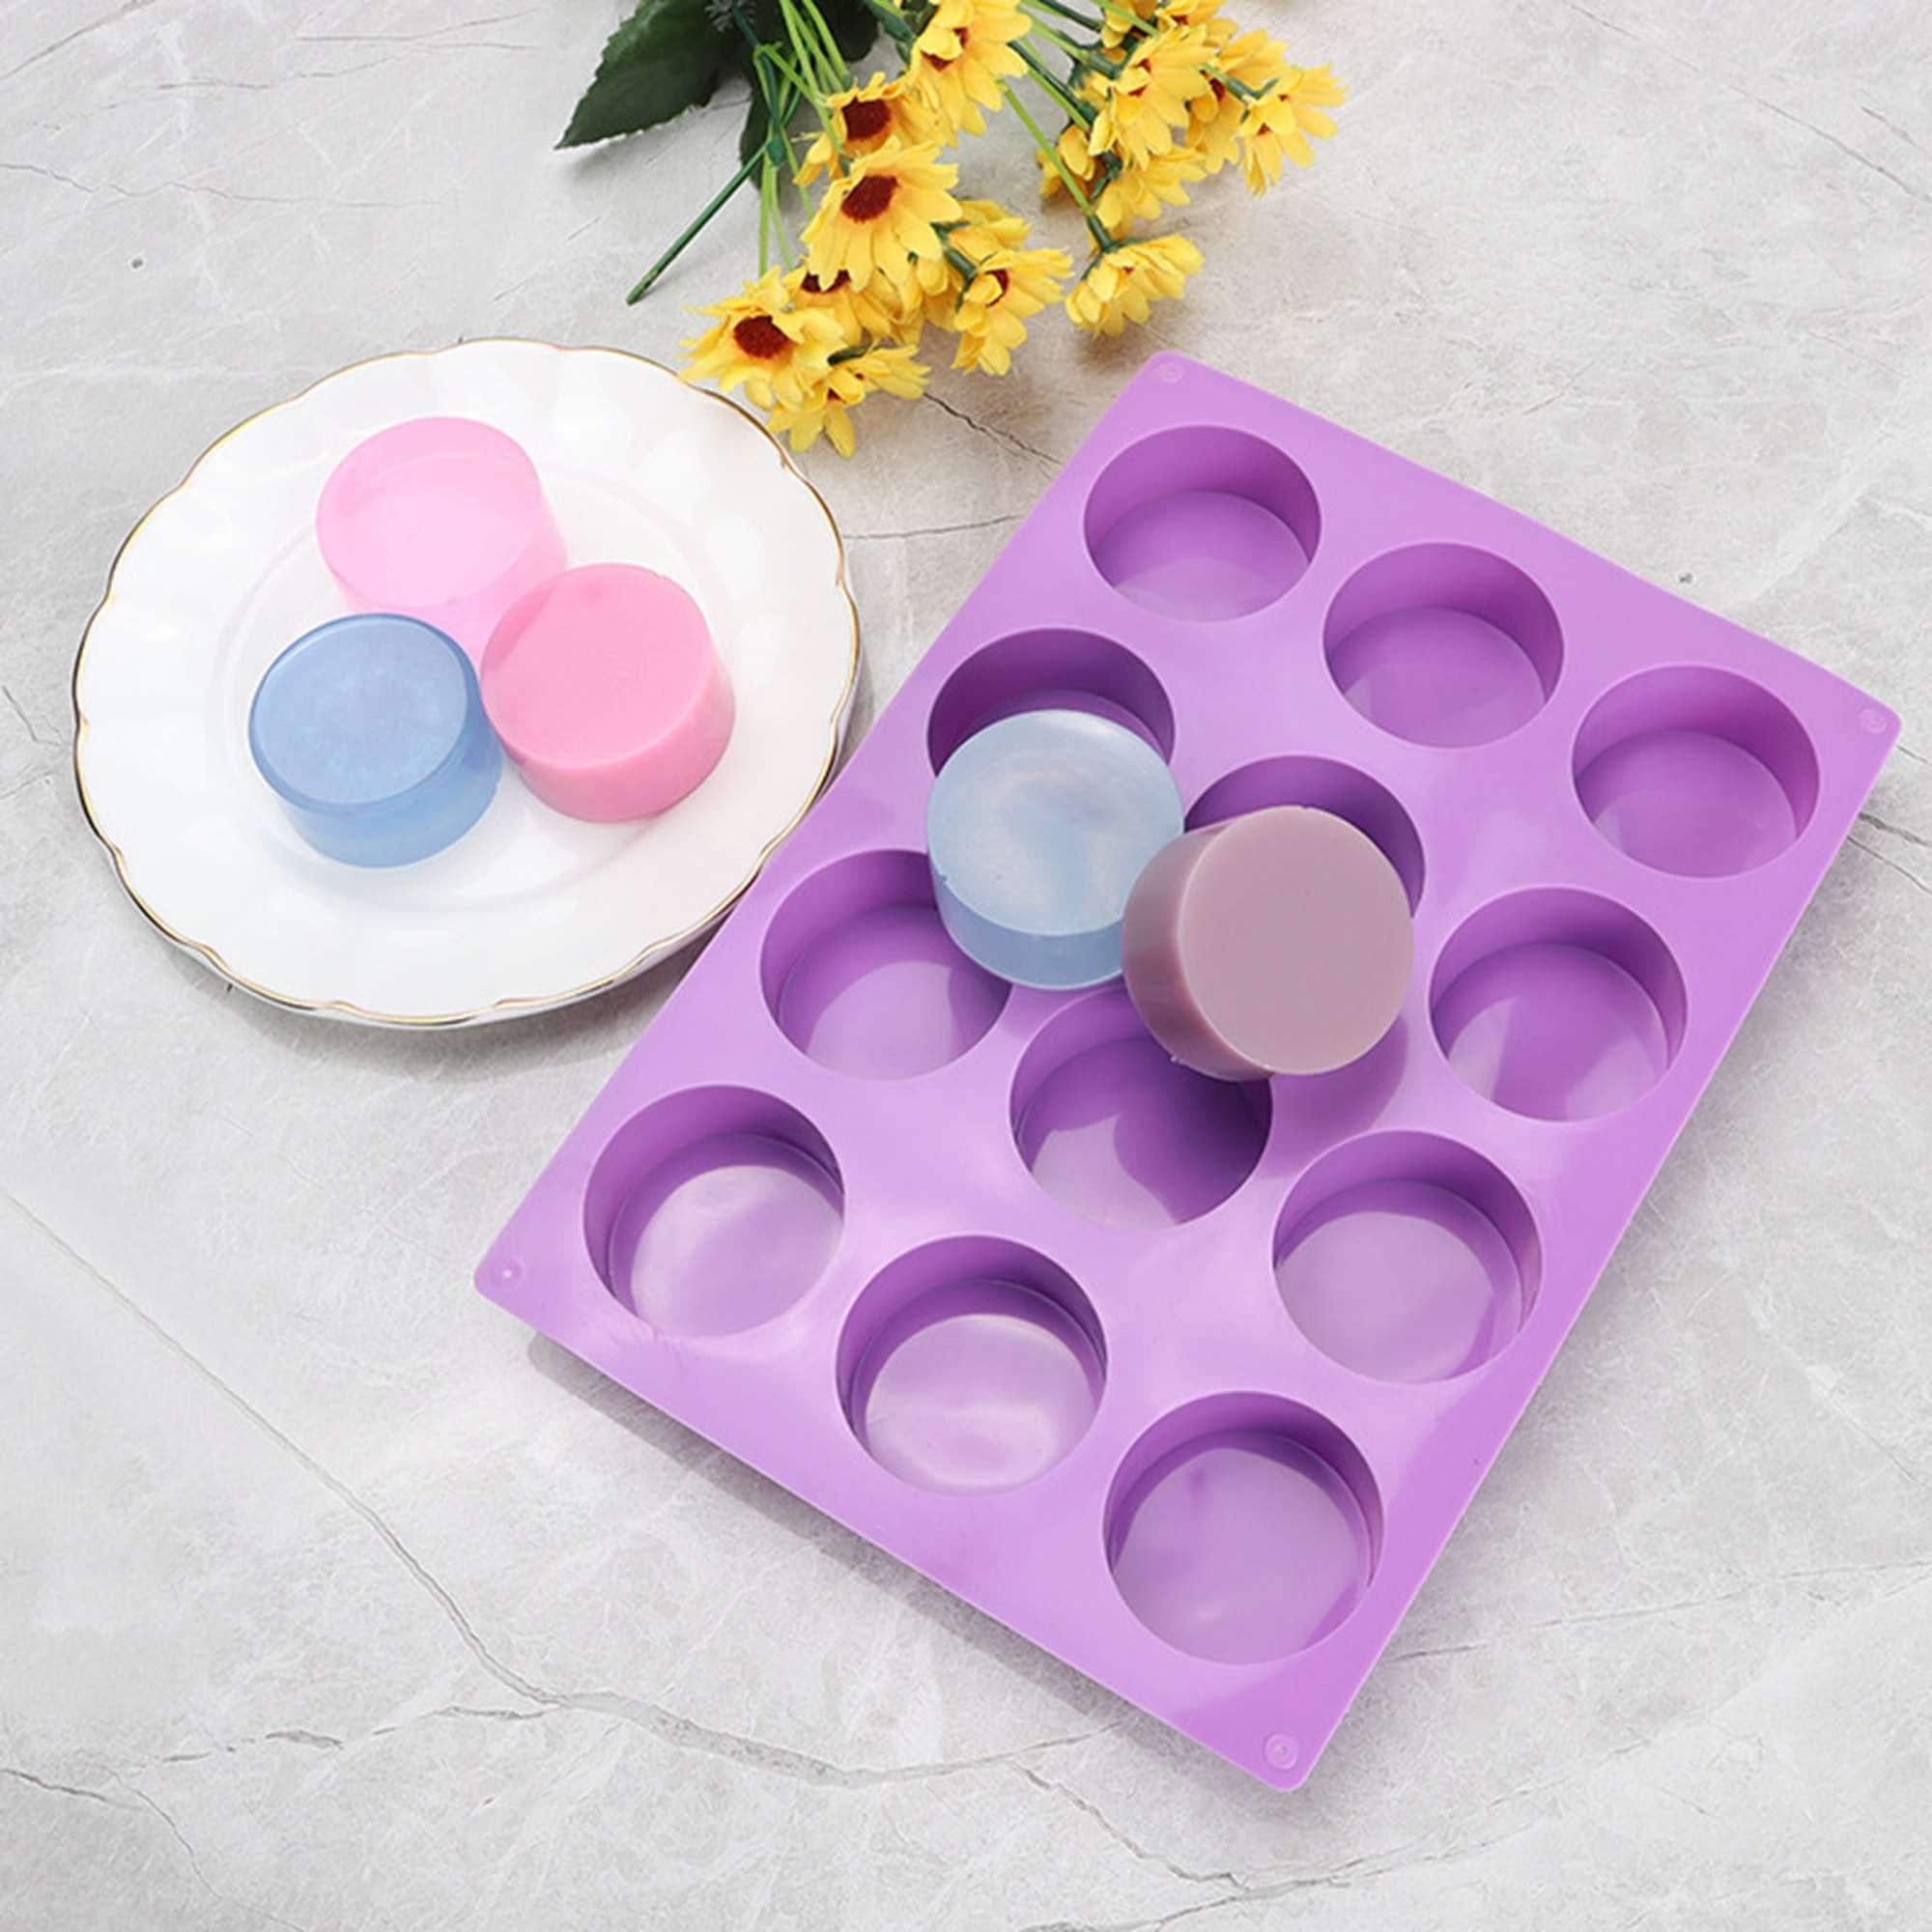 Large Silicone Molds For Baking Reusable 6-cavity Round Baking Mold  Non-stick Food Grade Silicone Disc Mold For Muffin Cake Candy Soap Resin  Diy Craft